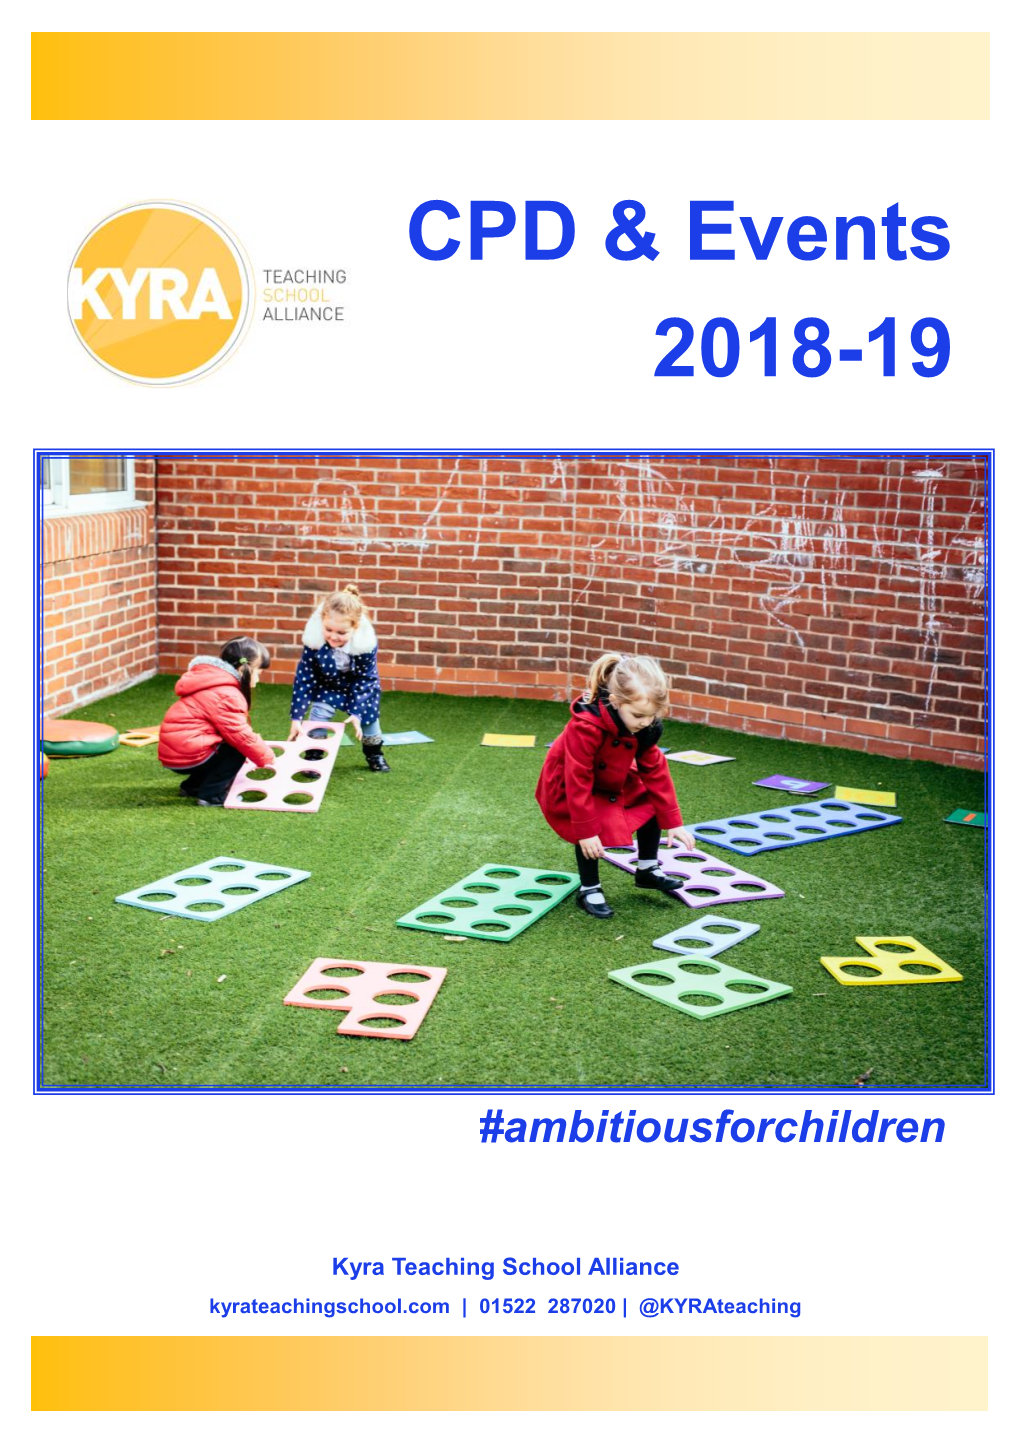 CPD & Events 2018-19